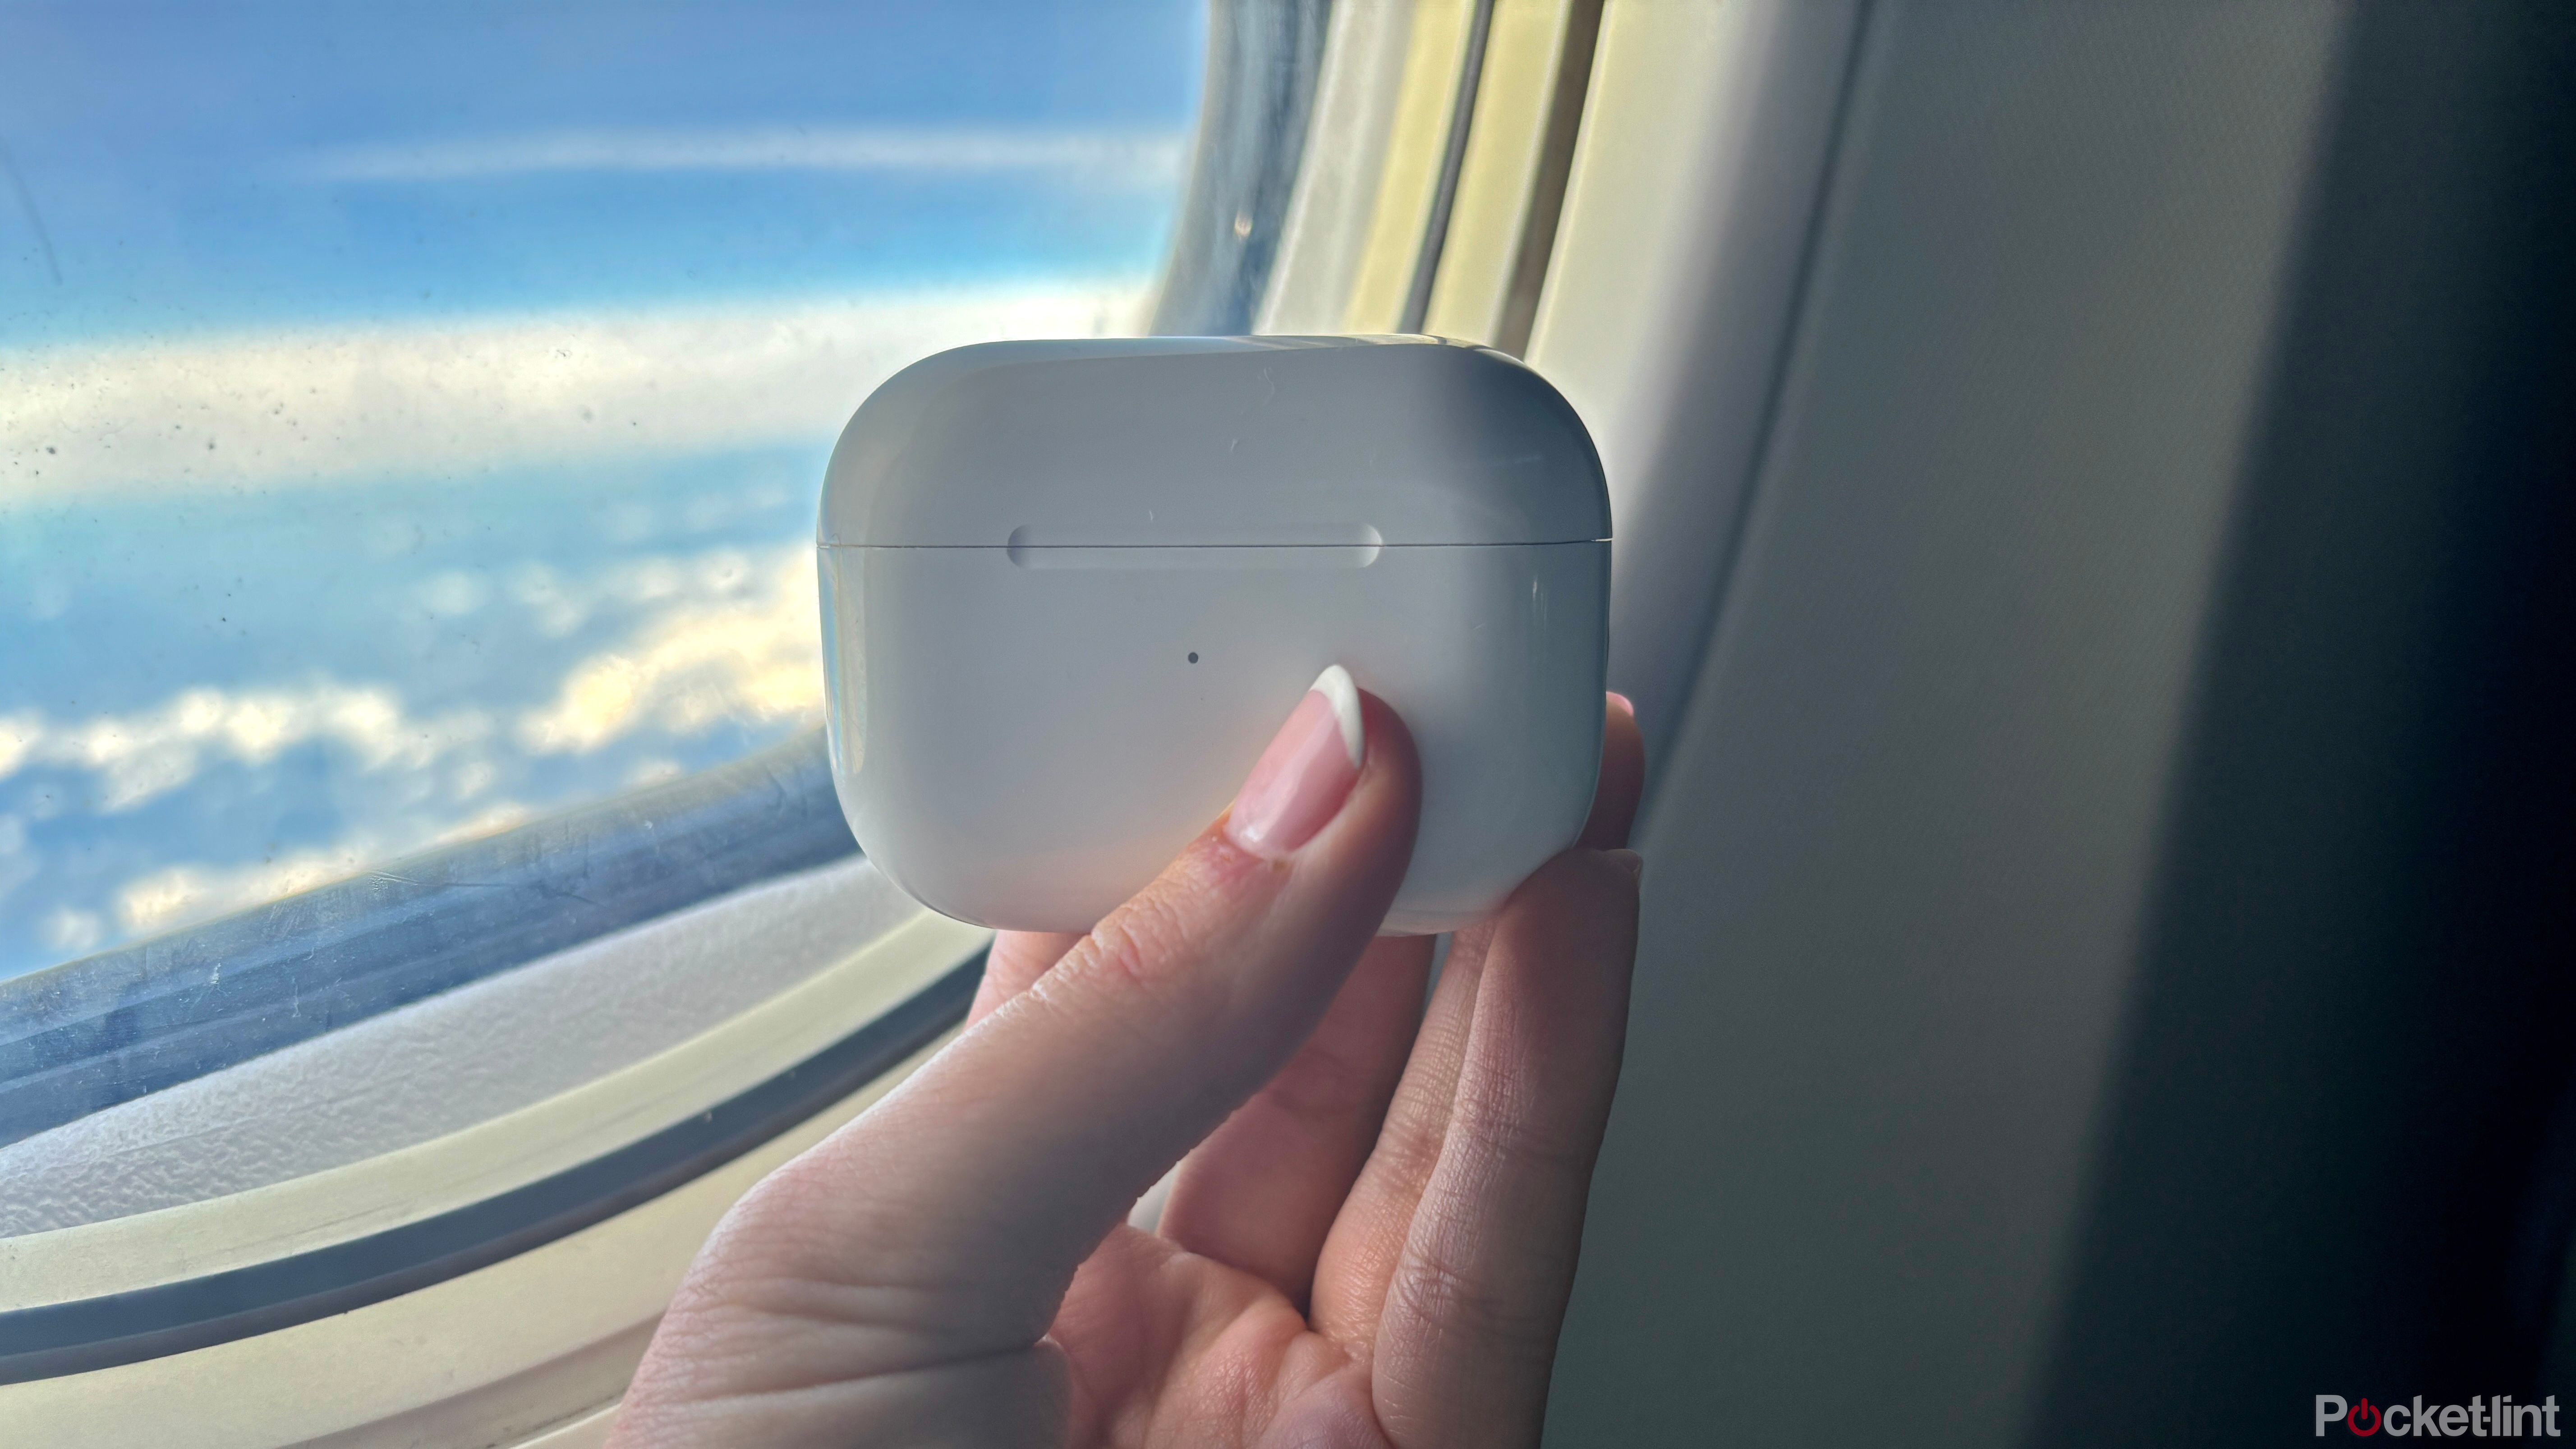 AirPods next to airplane window